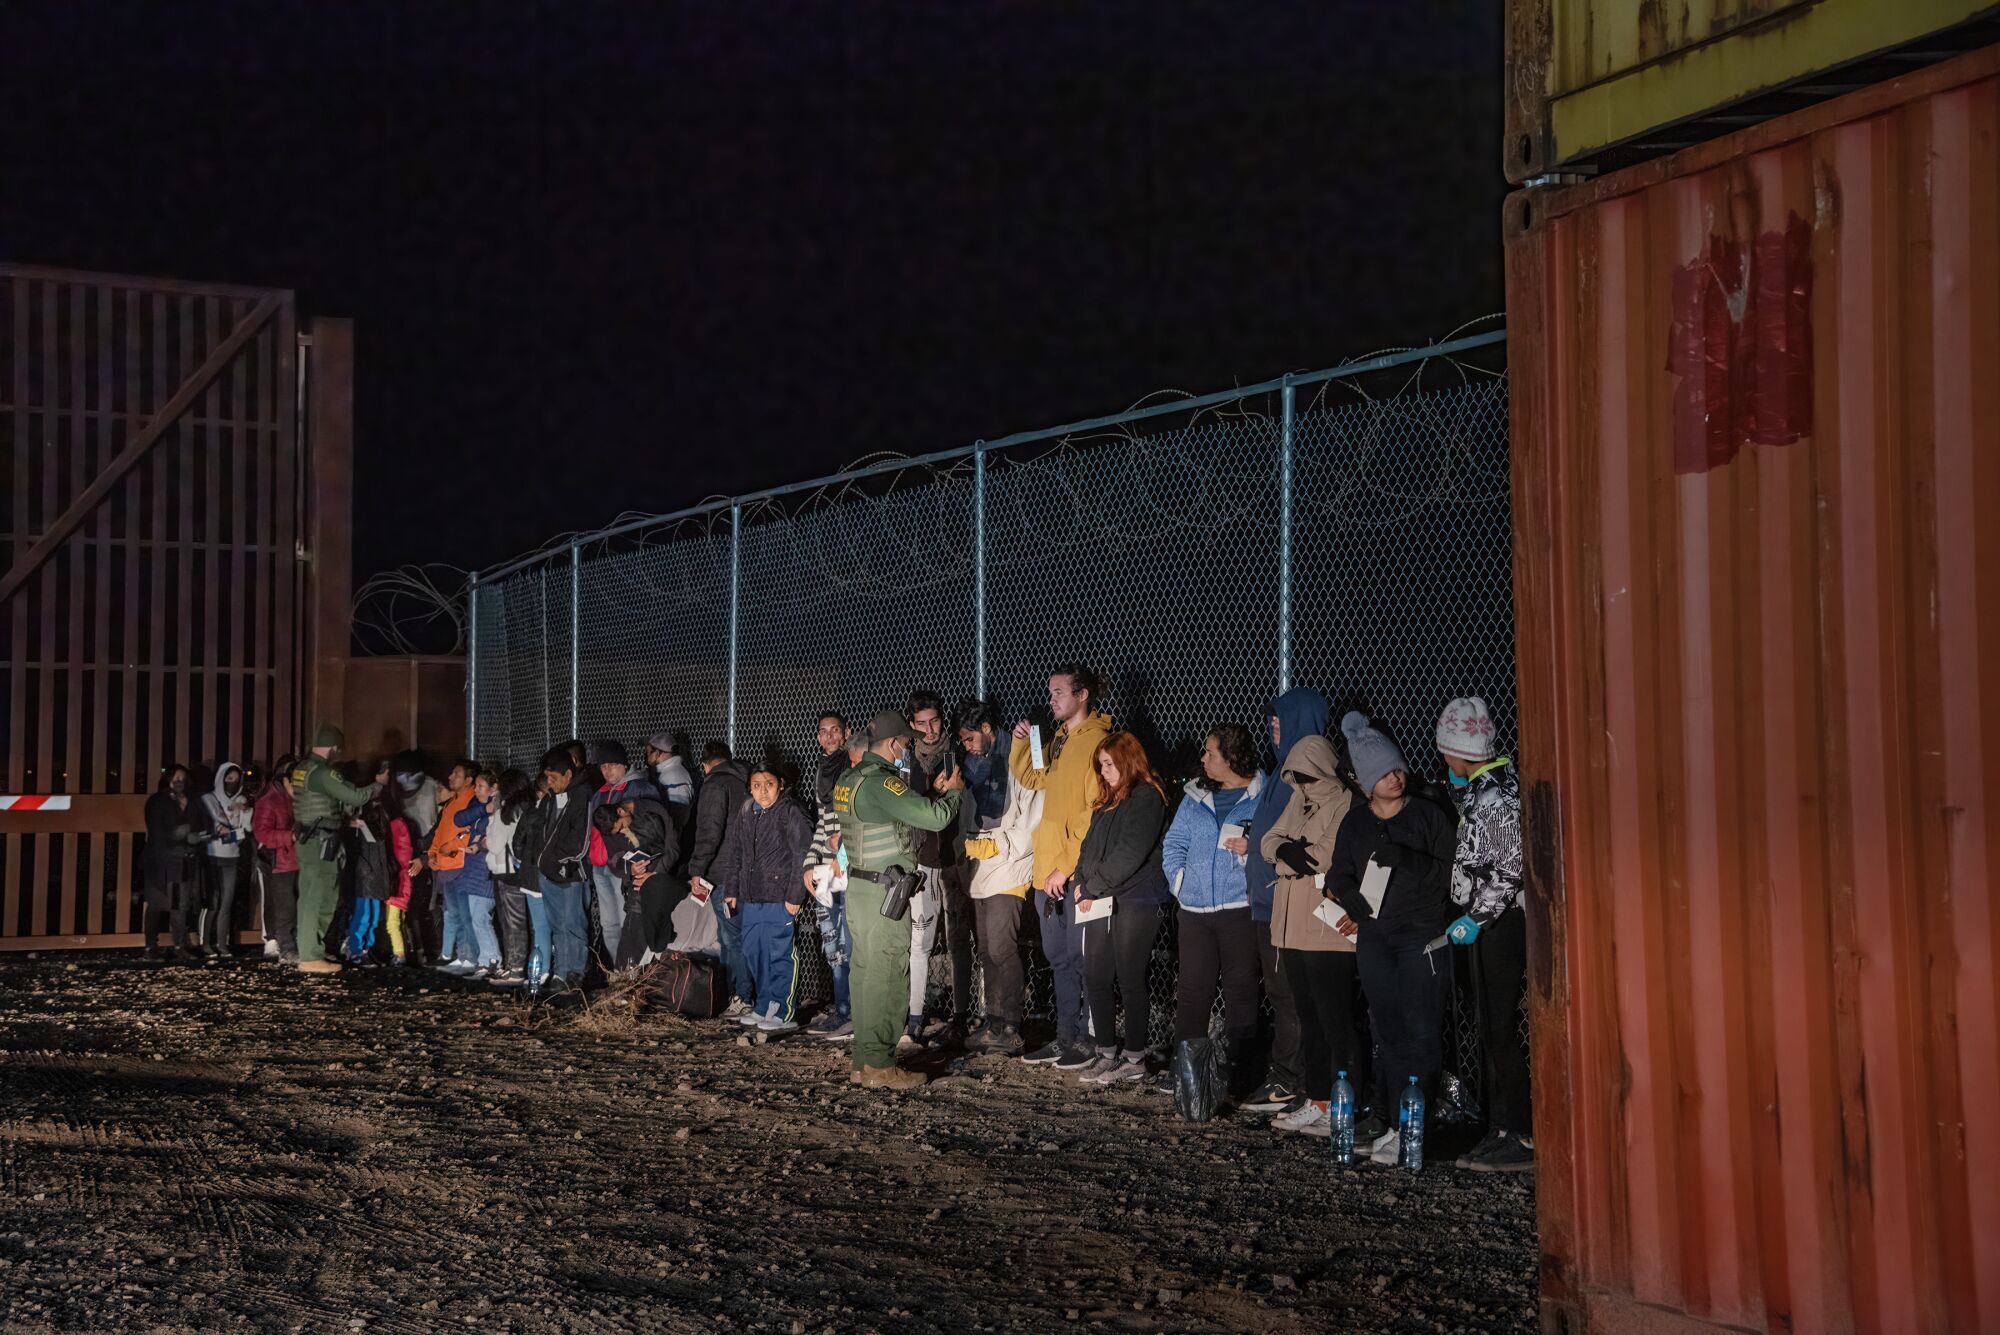 Two US Border Patrol agents photograph part of about 100 people who surrendered after crossing the Mexico-Arizona border